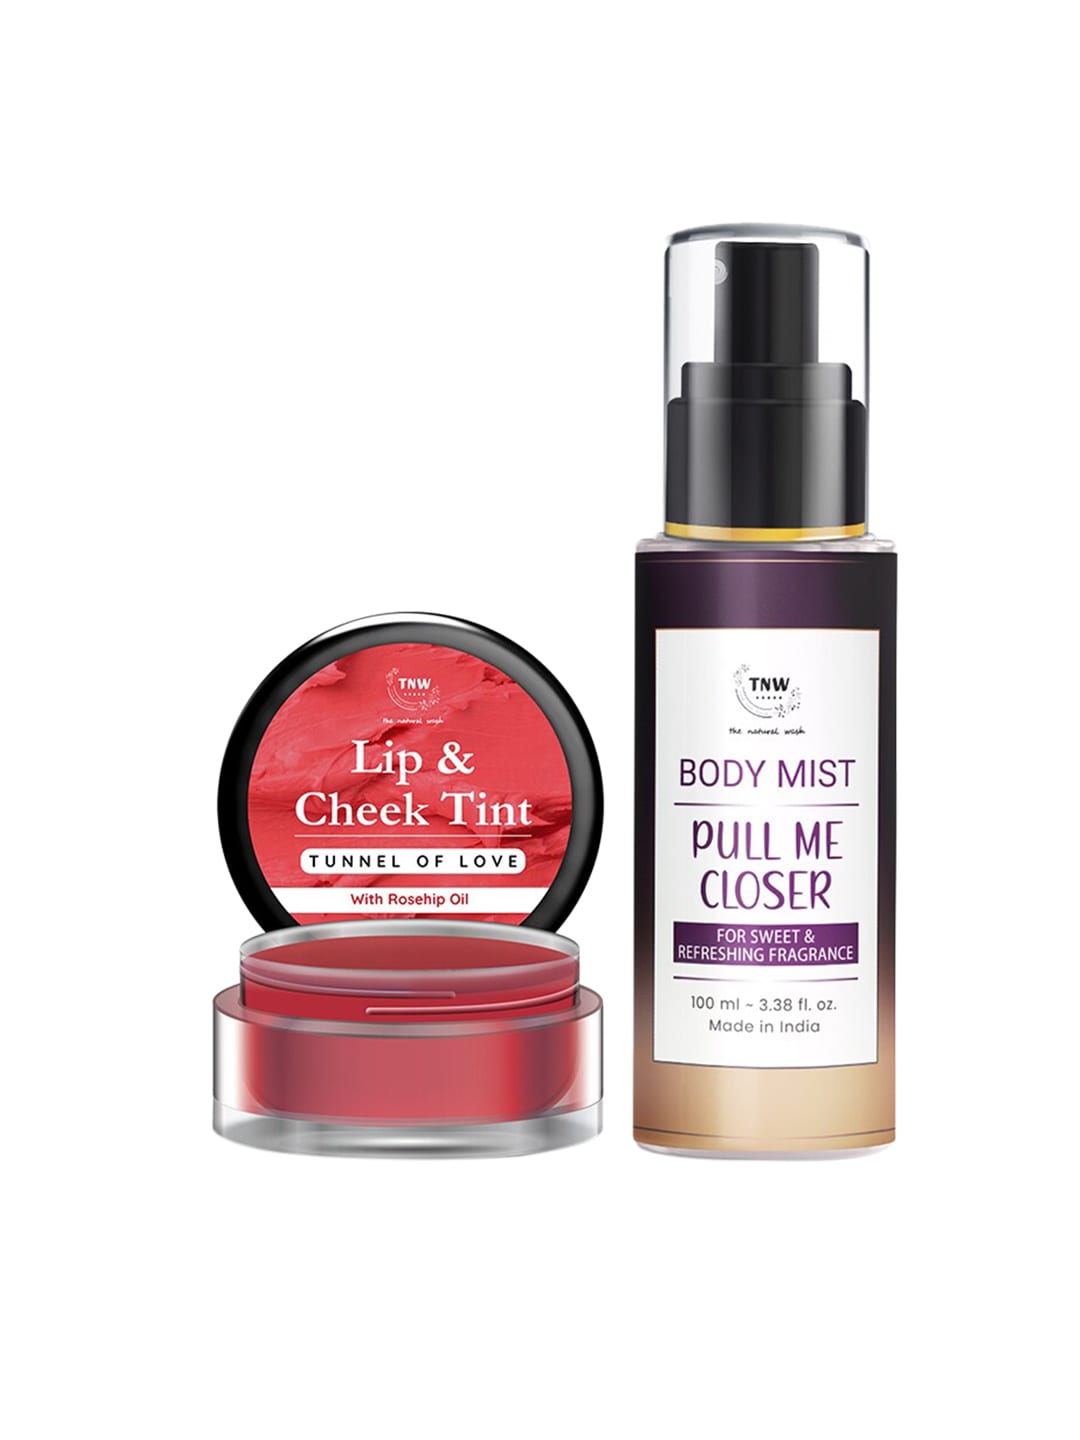 TNW the natural wash Tunnel of Love Lip & Cheek Tint - Pull Me Closer Body Mist Price in India